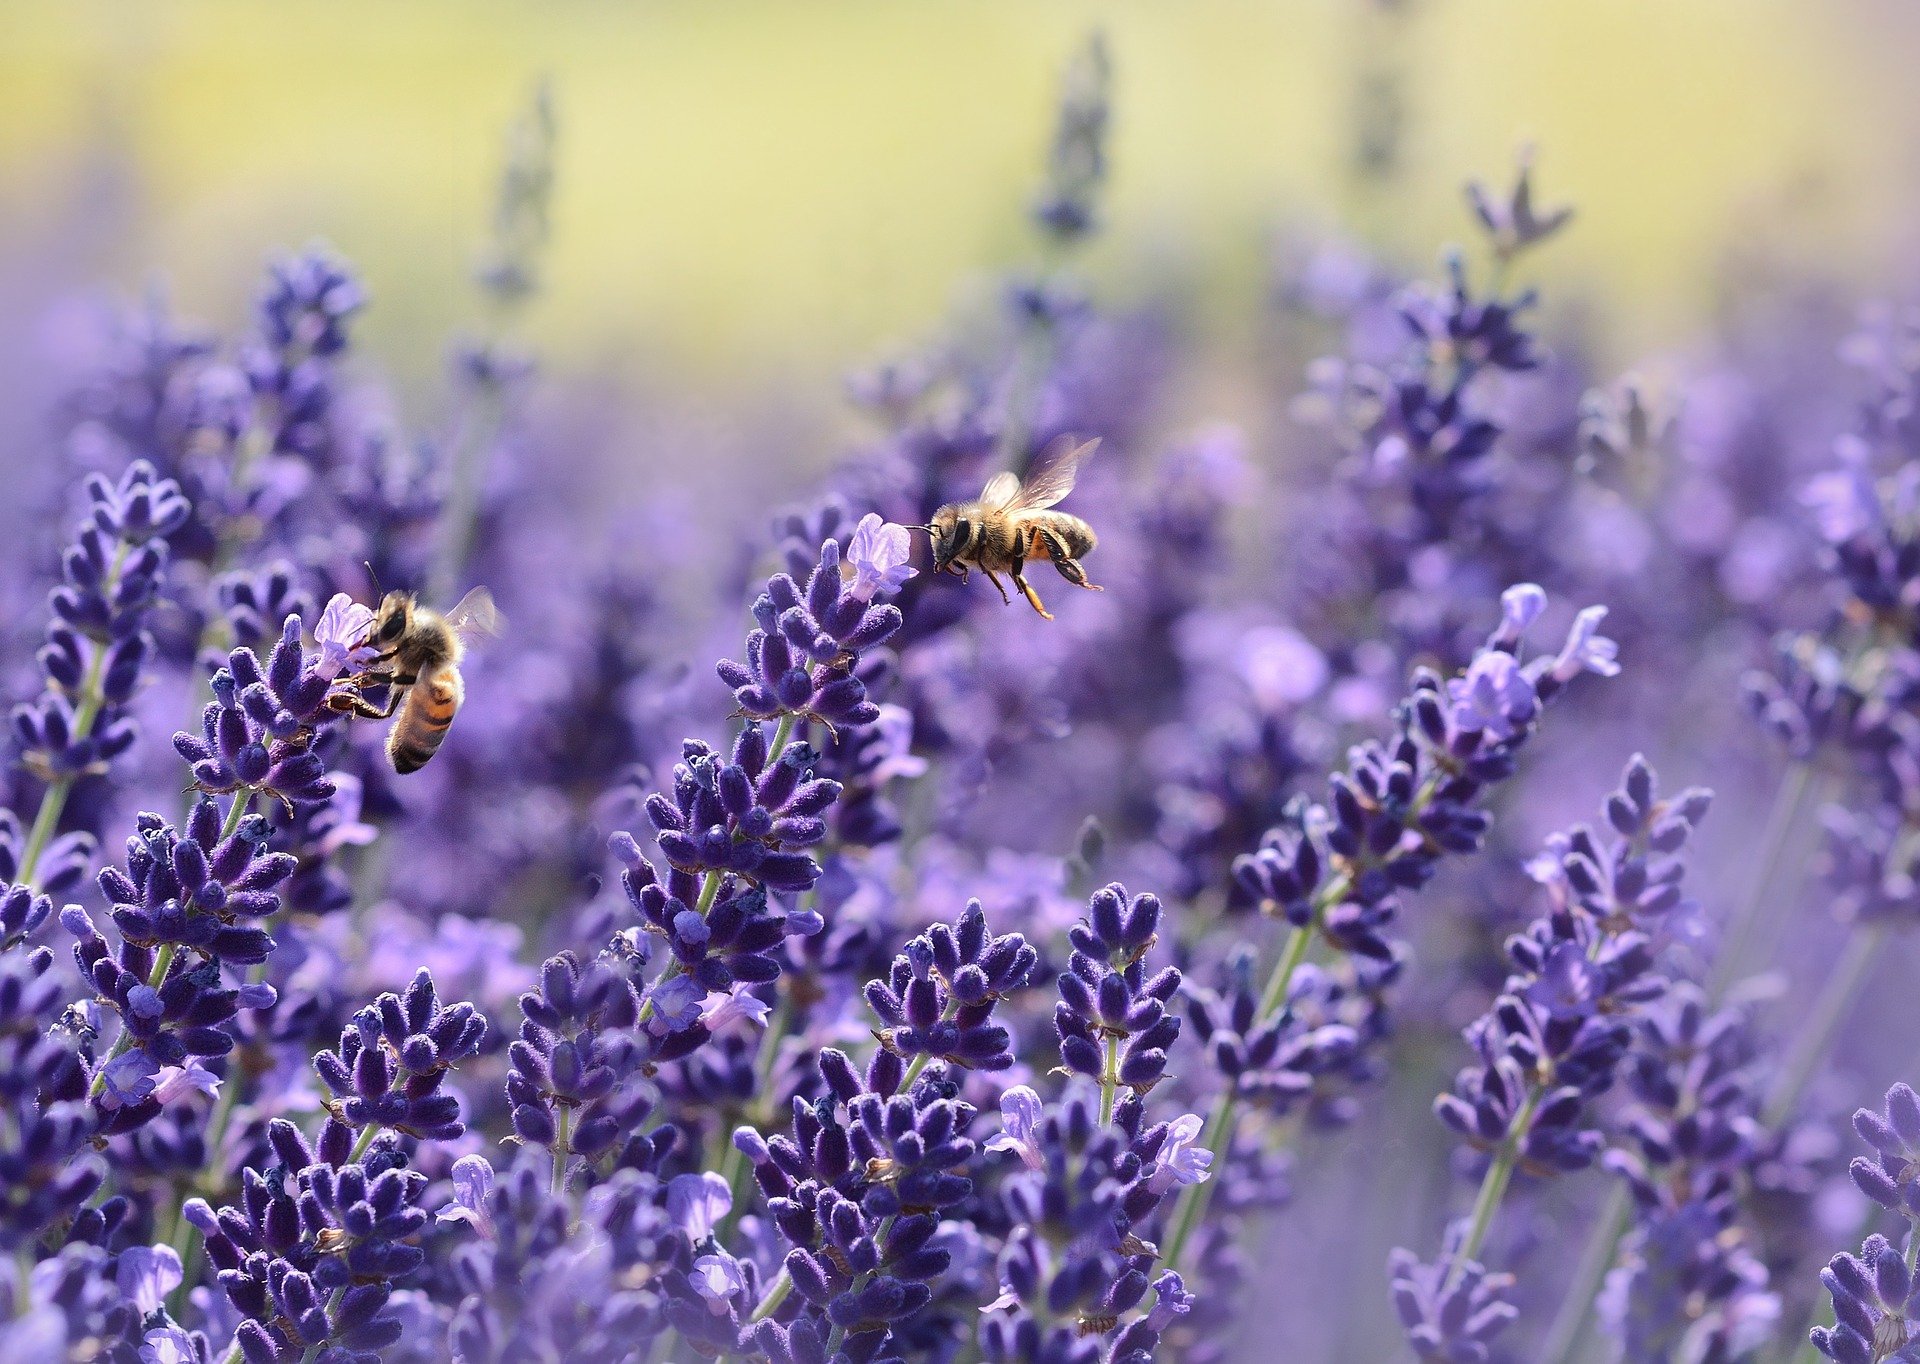 An image of bees on lavender